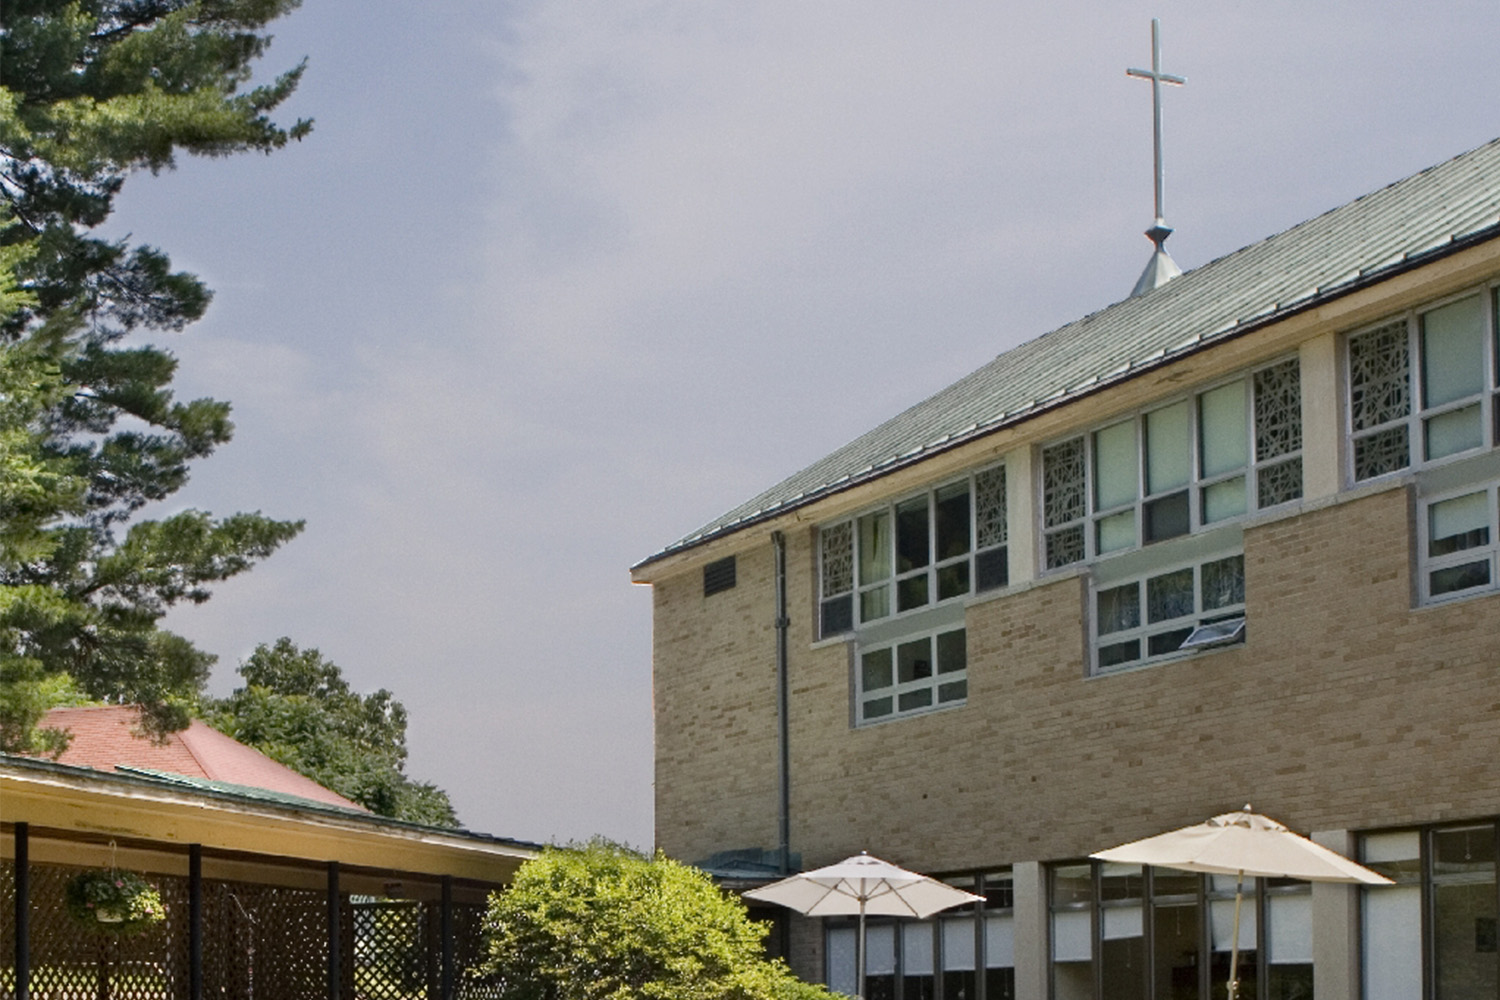 Exterior of mental health wing, with green tile roof and holy cross mounted on top 